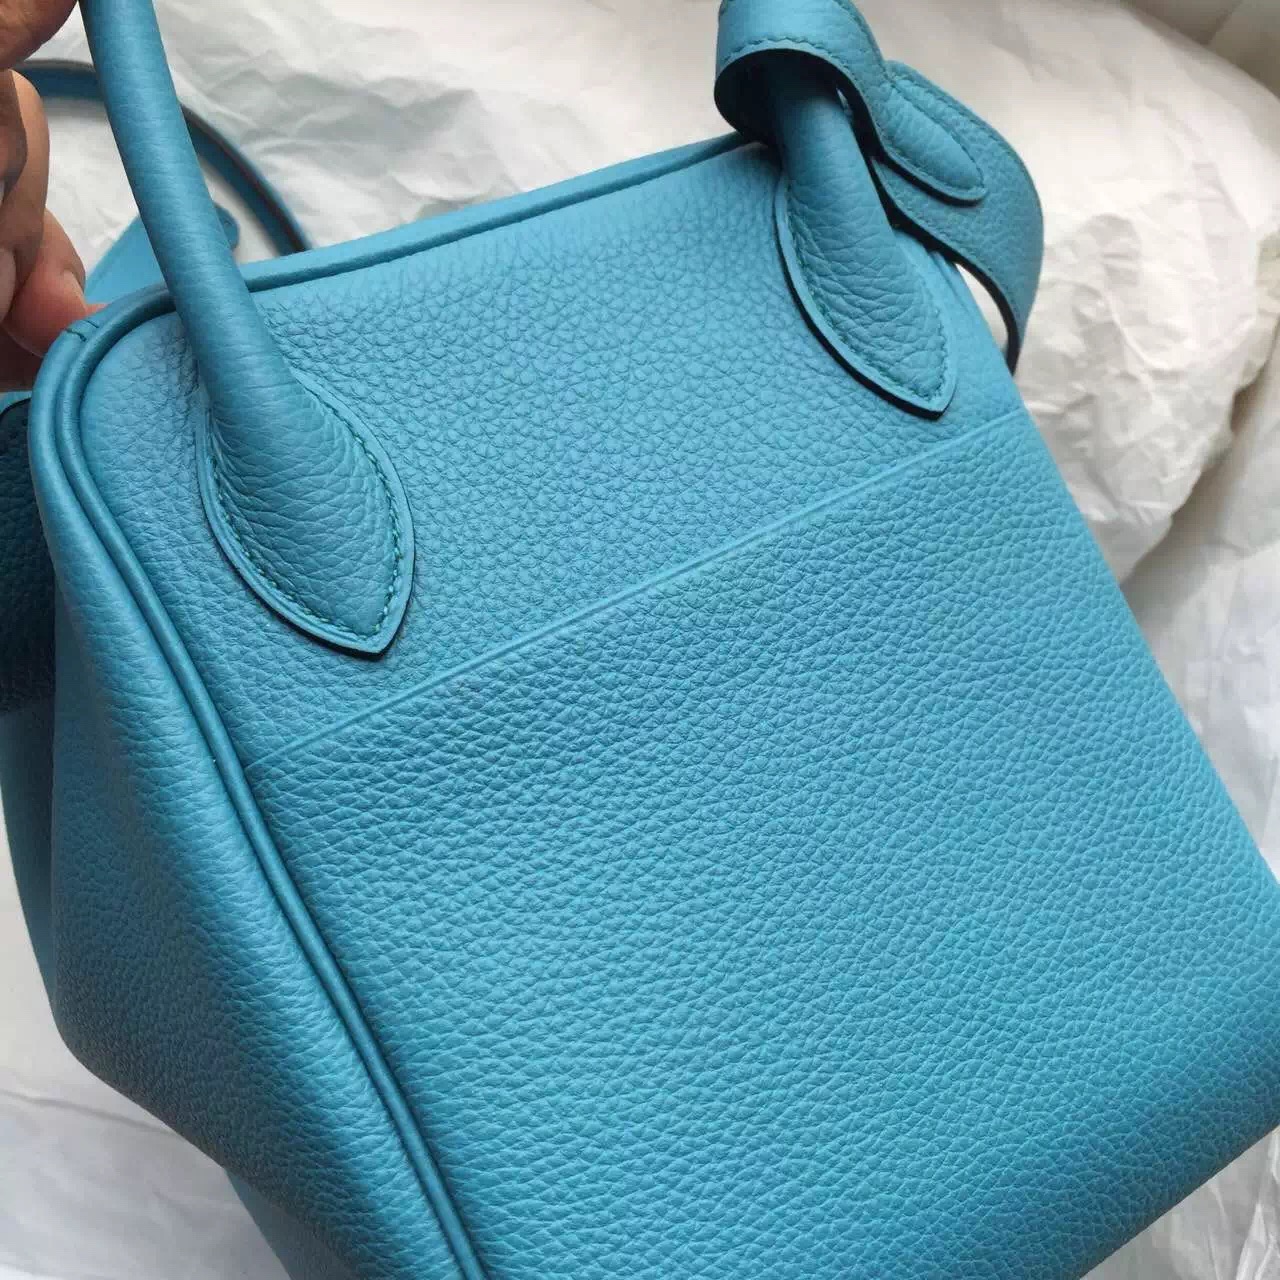 Discount Hermes Lindy Bag 30CM 7B Turquoise Blue Togo Leather Silver Hardware